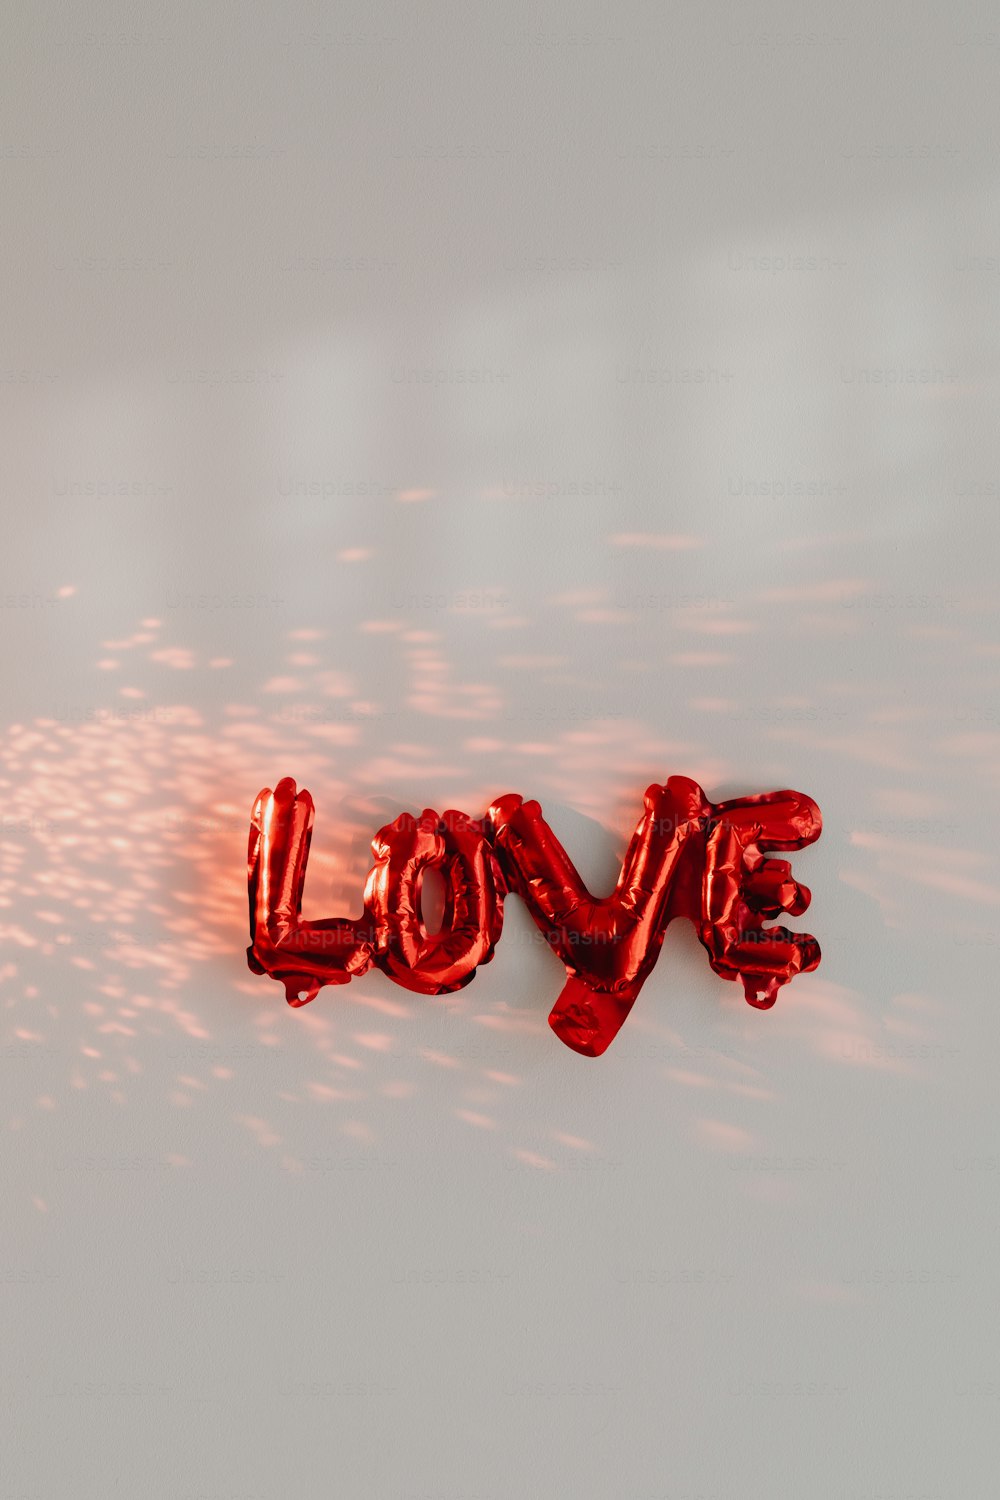 the word love spelled out of balloons on a white surface